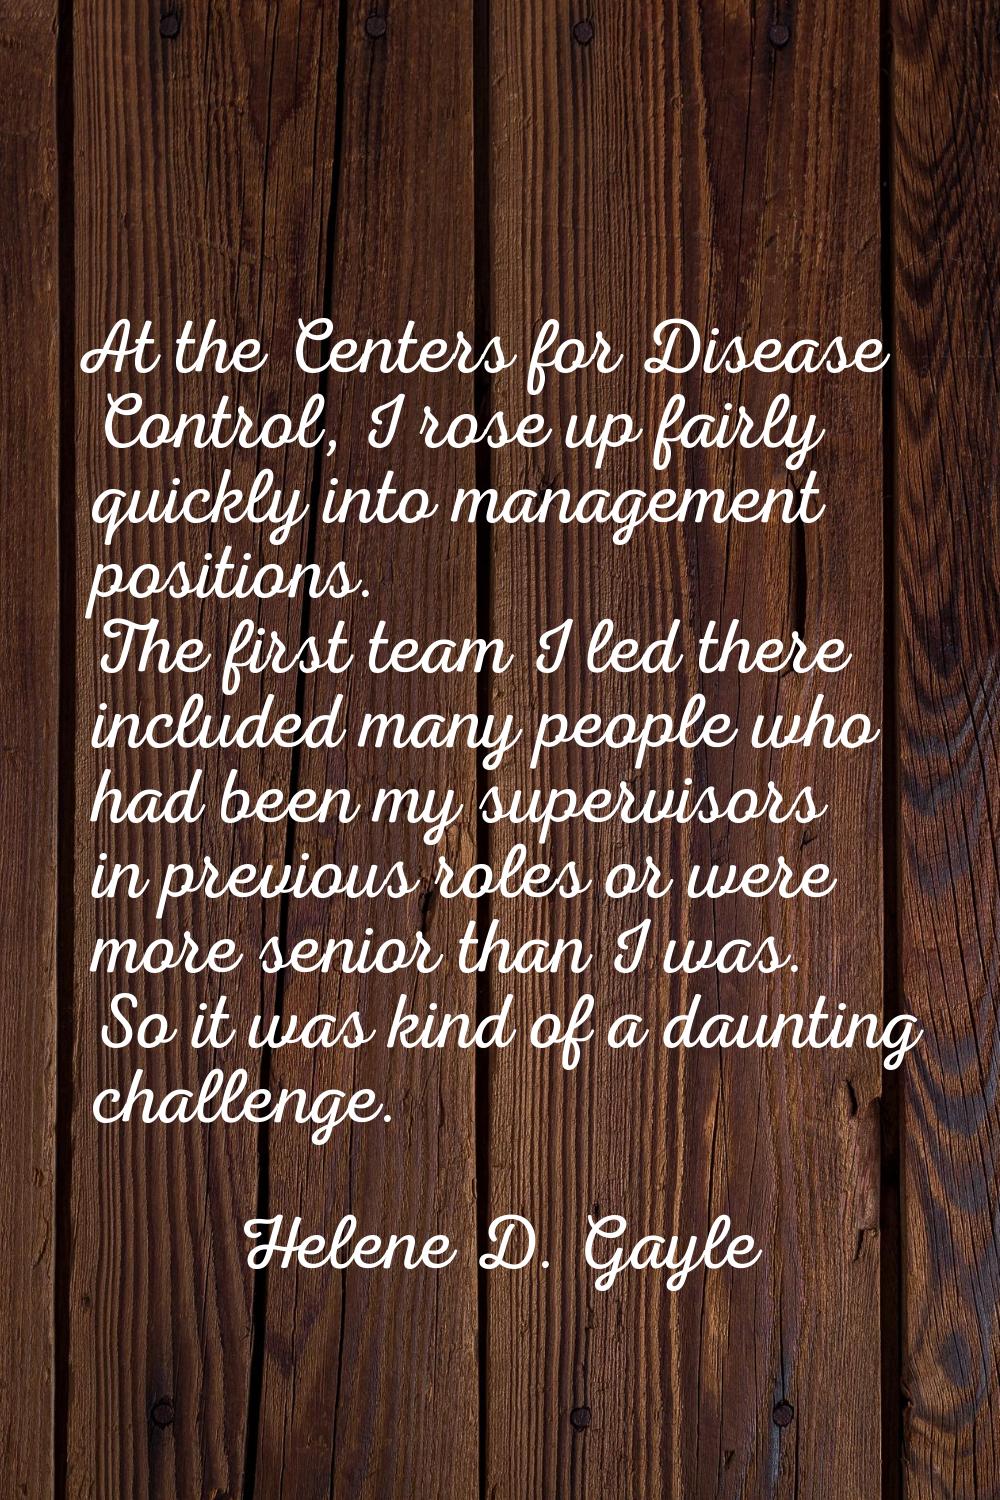 At the Centers for Disease Control, I rose up fairly quickly into management positions. The first t